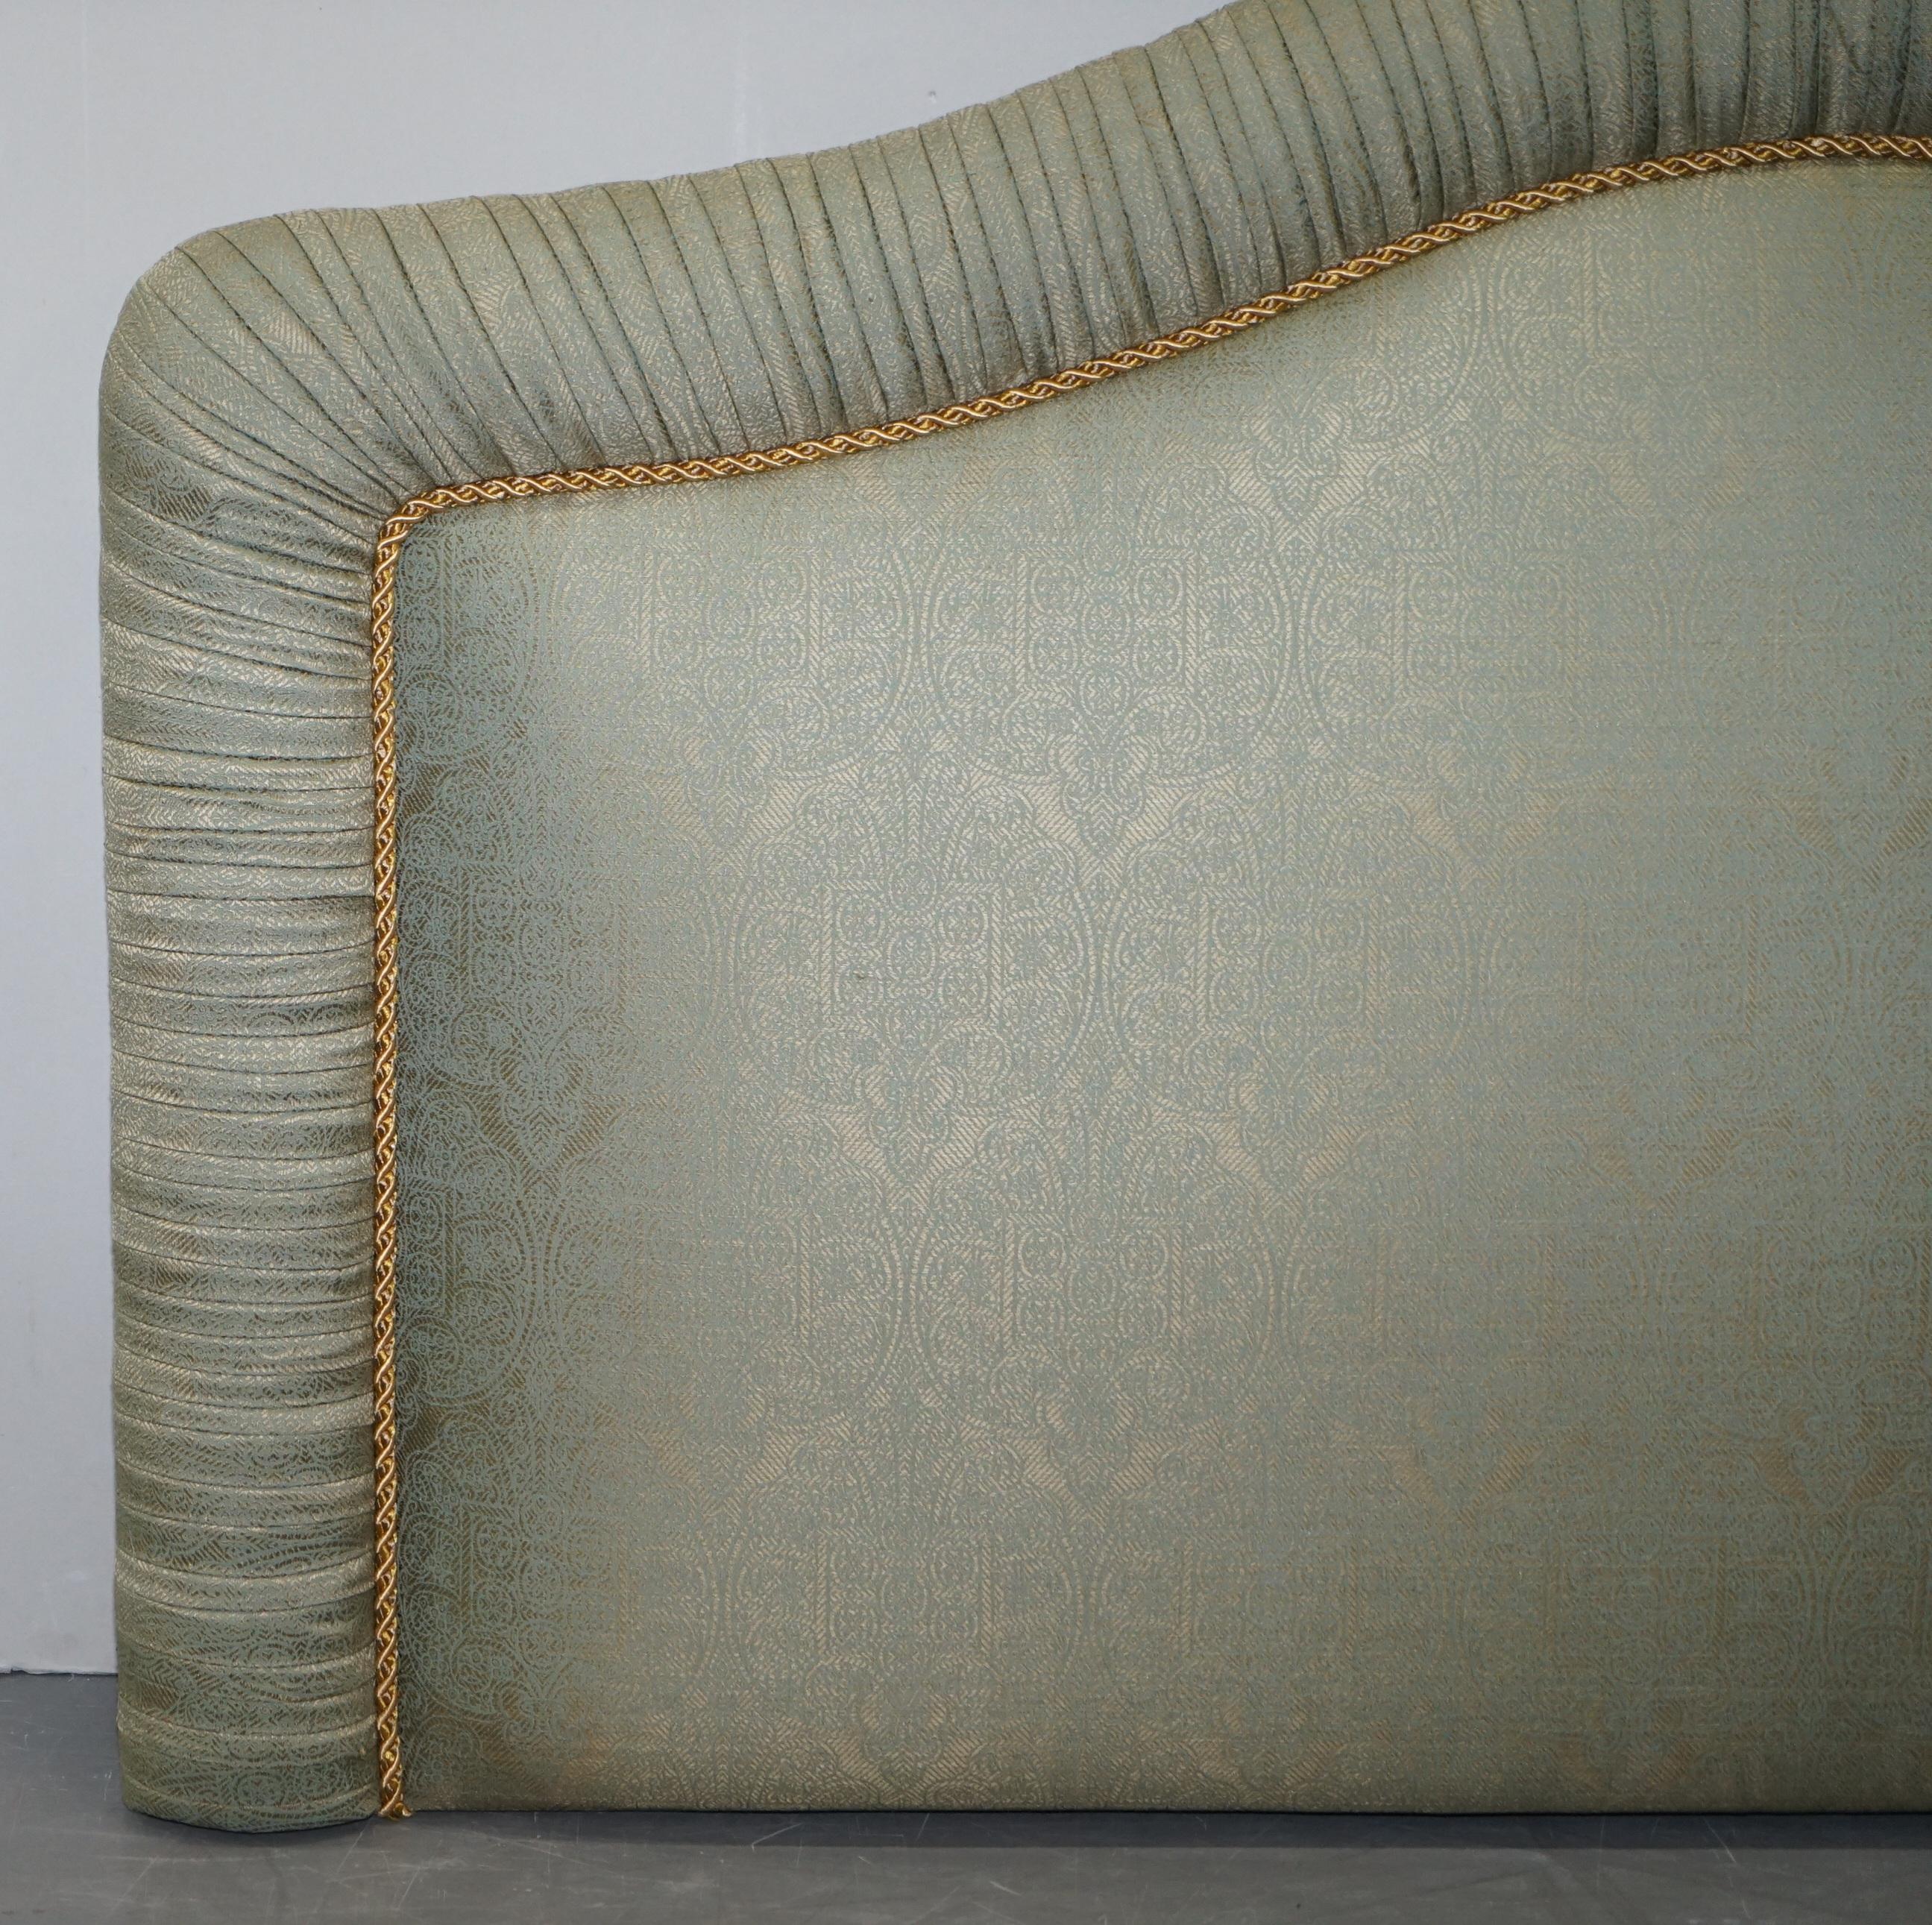 We are delighted to offer for sale this stunning Harrods London Silk Embroidered king size headboard 

This headboard is sublime quality and retailed for a small fortune new. It’s designed to sit on a wall mounted slat but it can be converted to